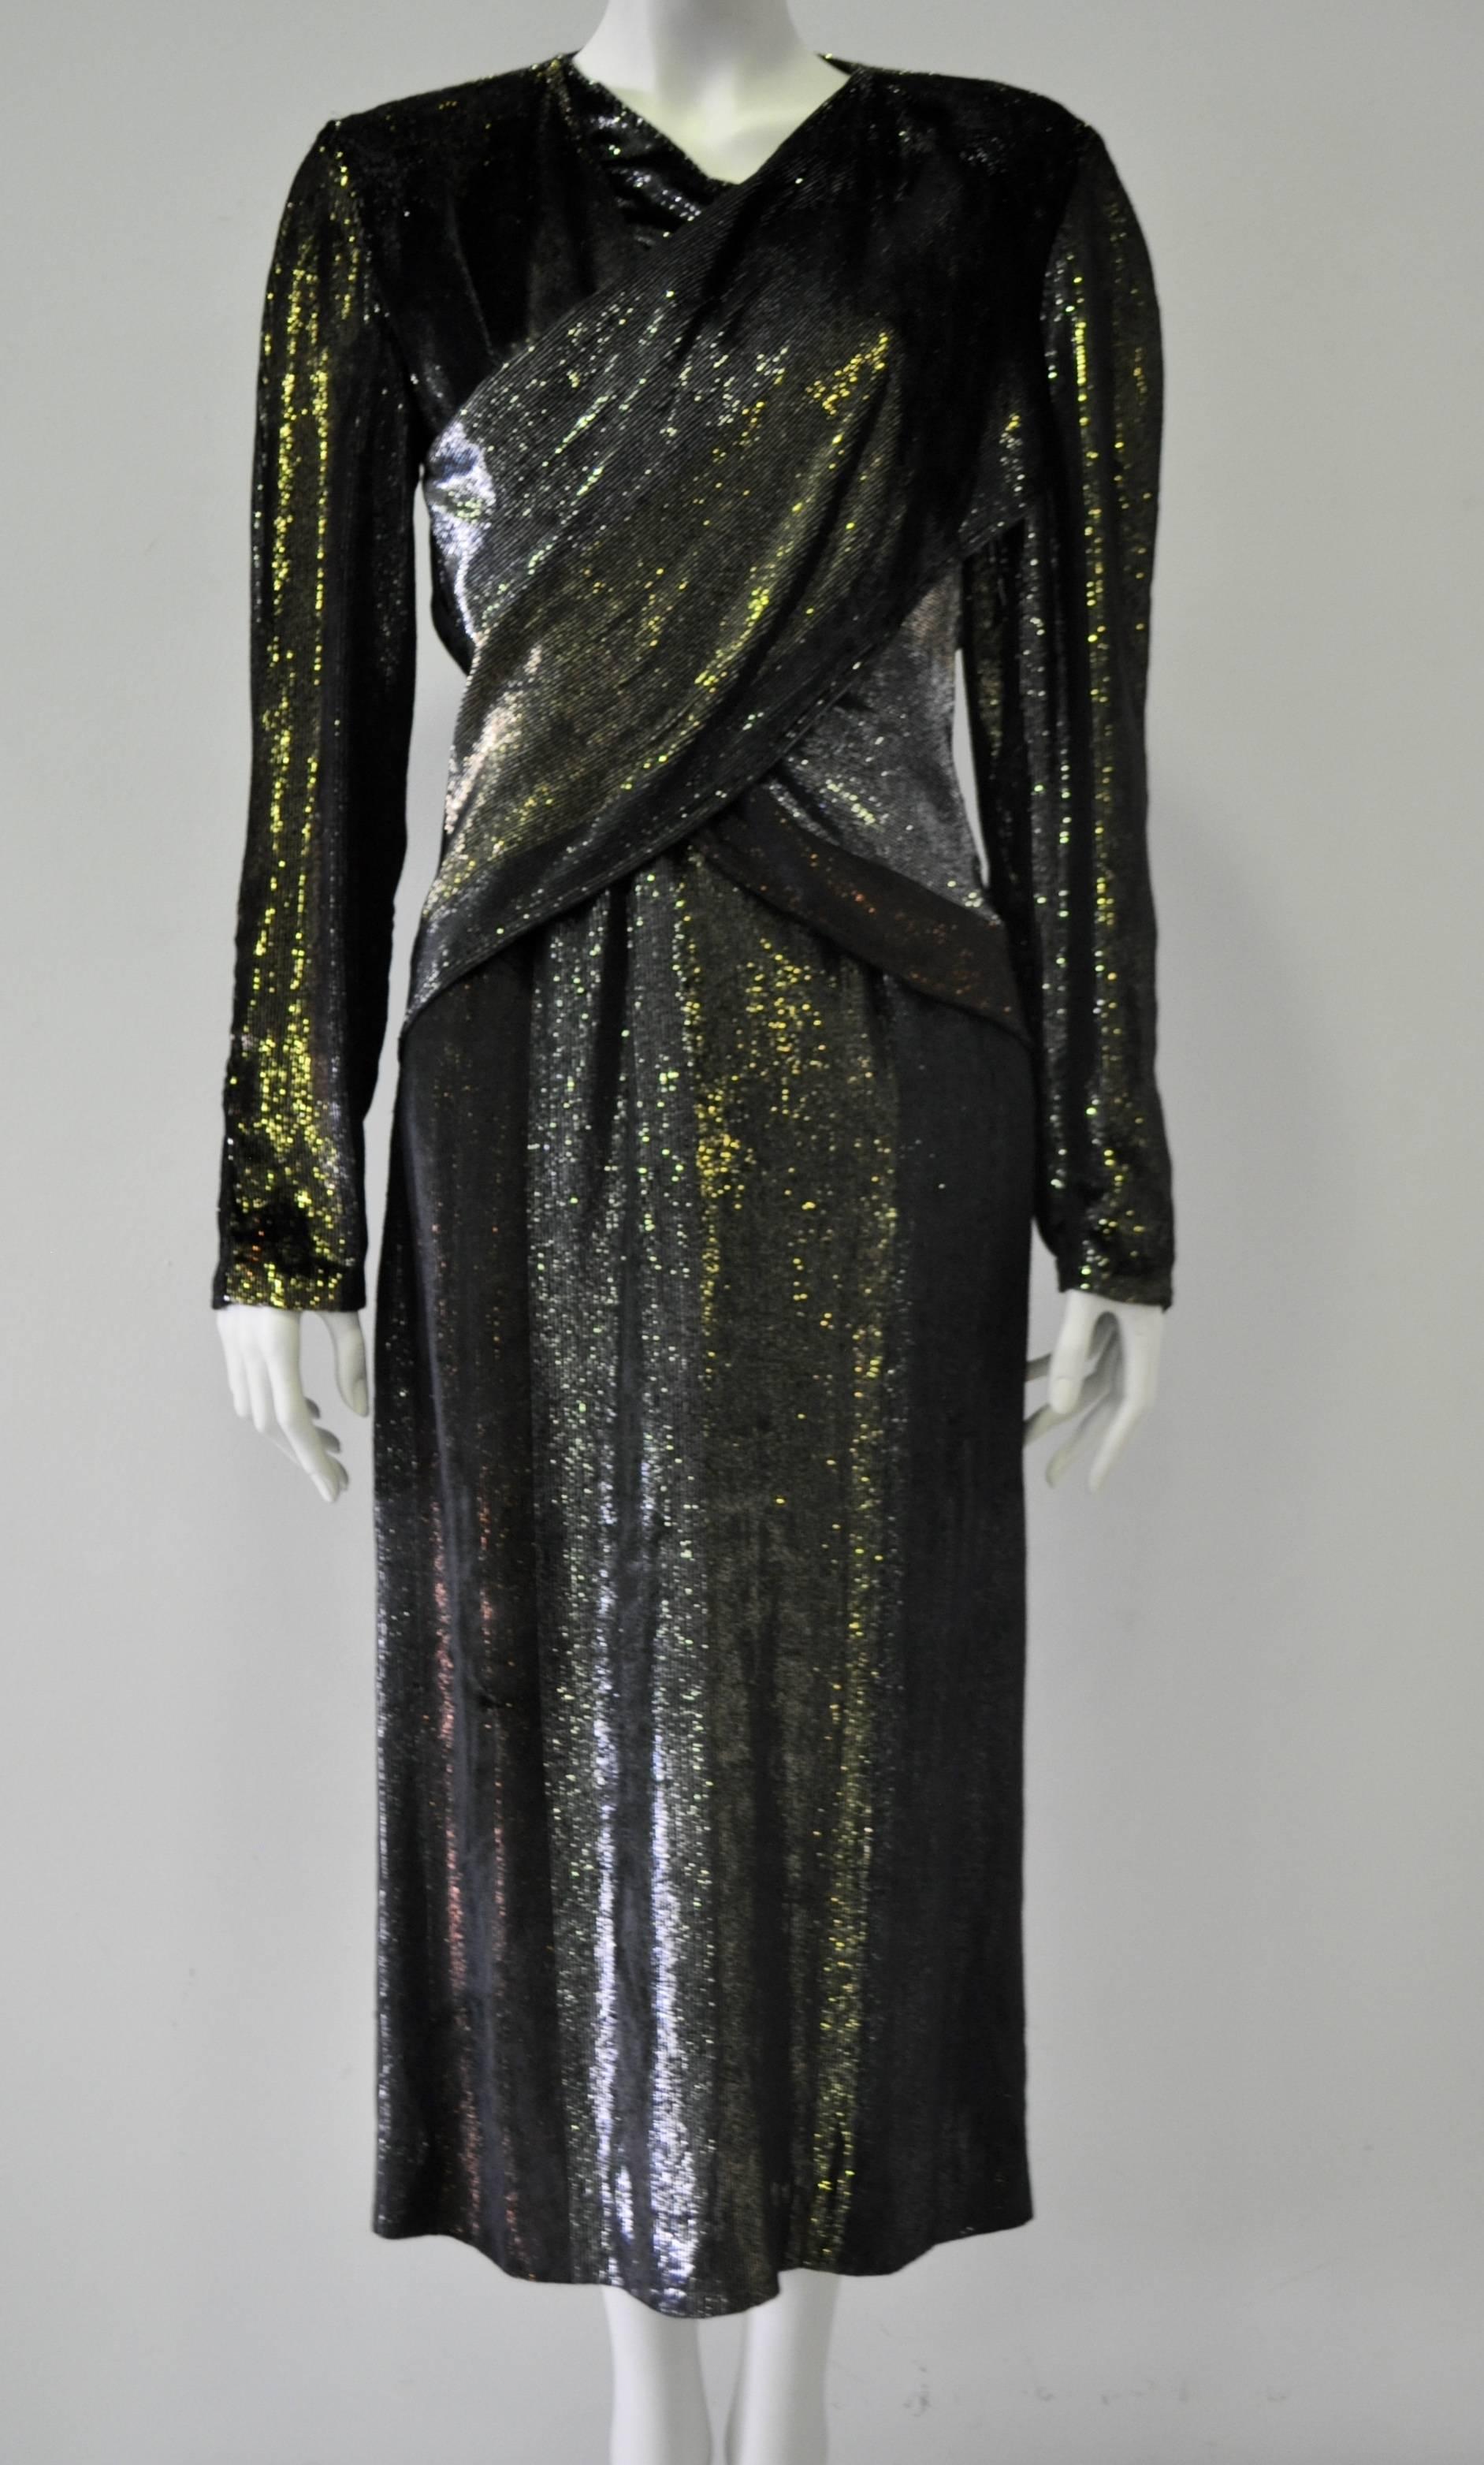 Rare Paco Rabanne Velvet Hues of Silver, Gold and Copper Lame Cross Front Bodycon Disco Dress